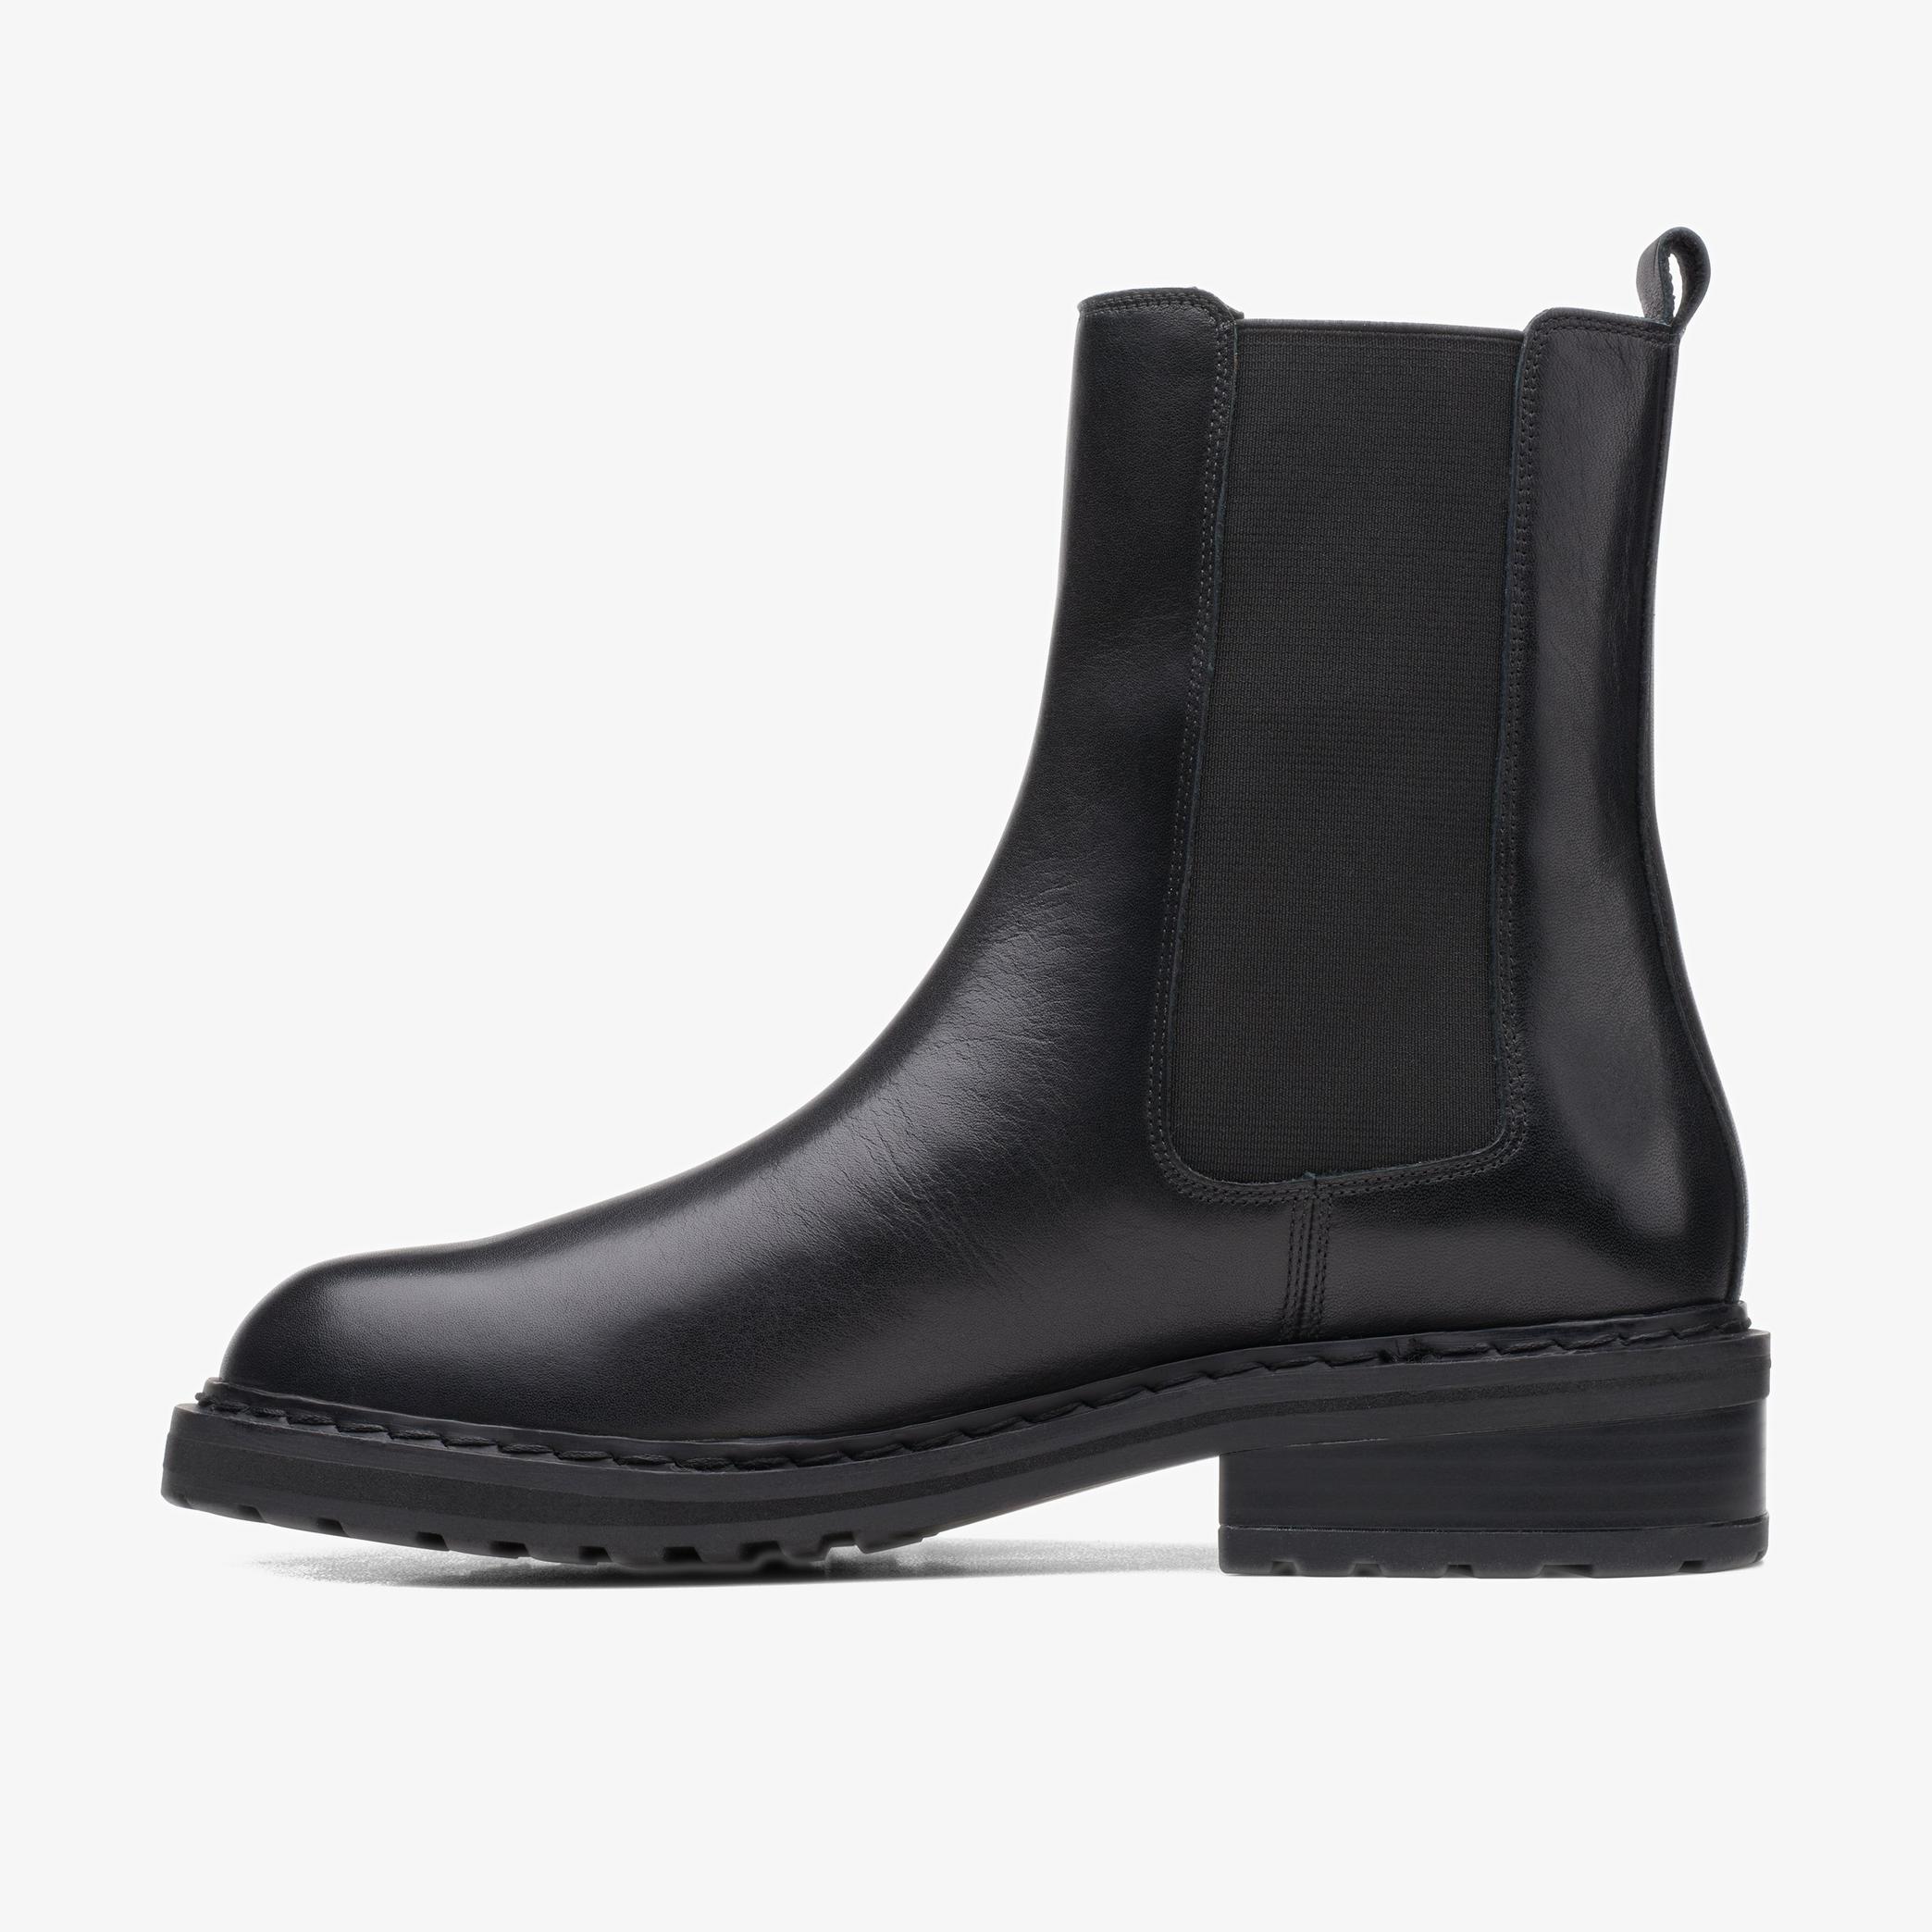 Tilham Chelsea Black Leather Ankle Boots, view 2 of 6